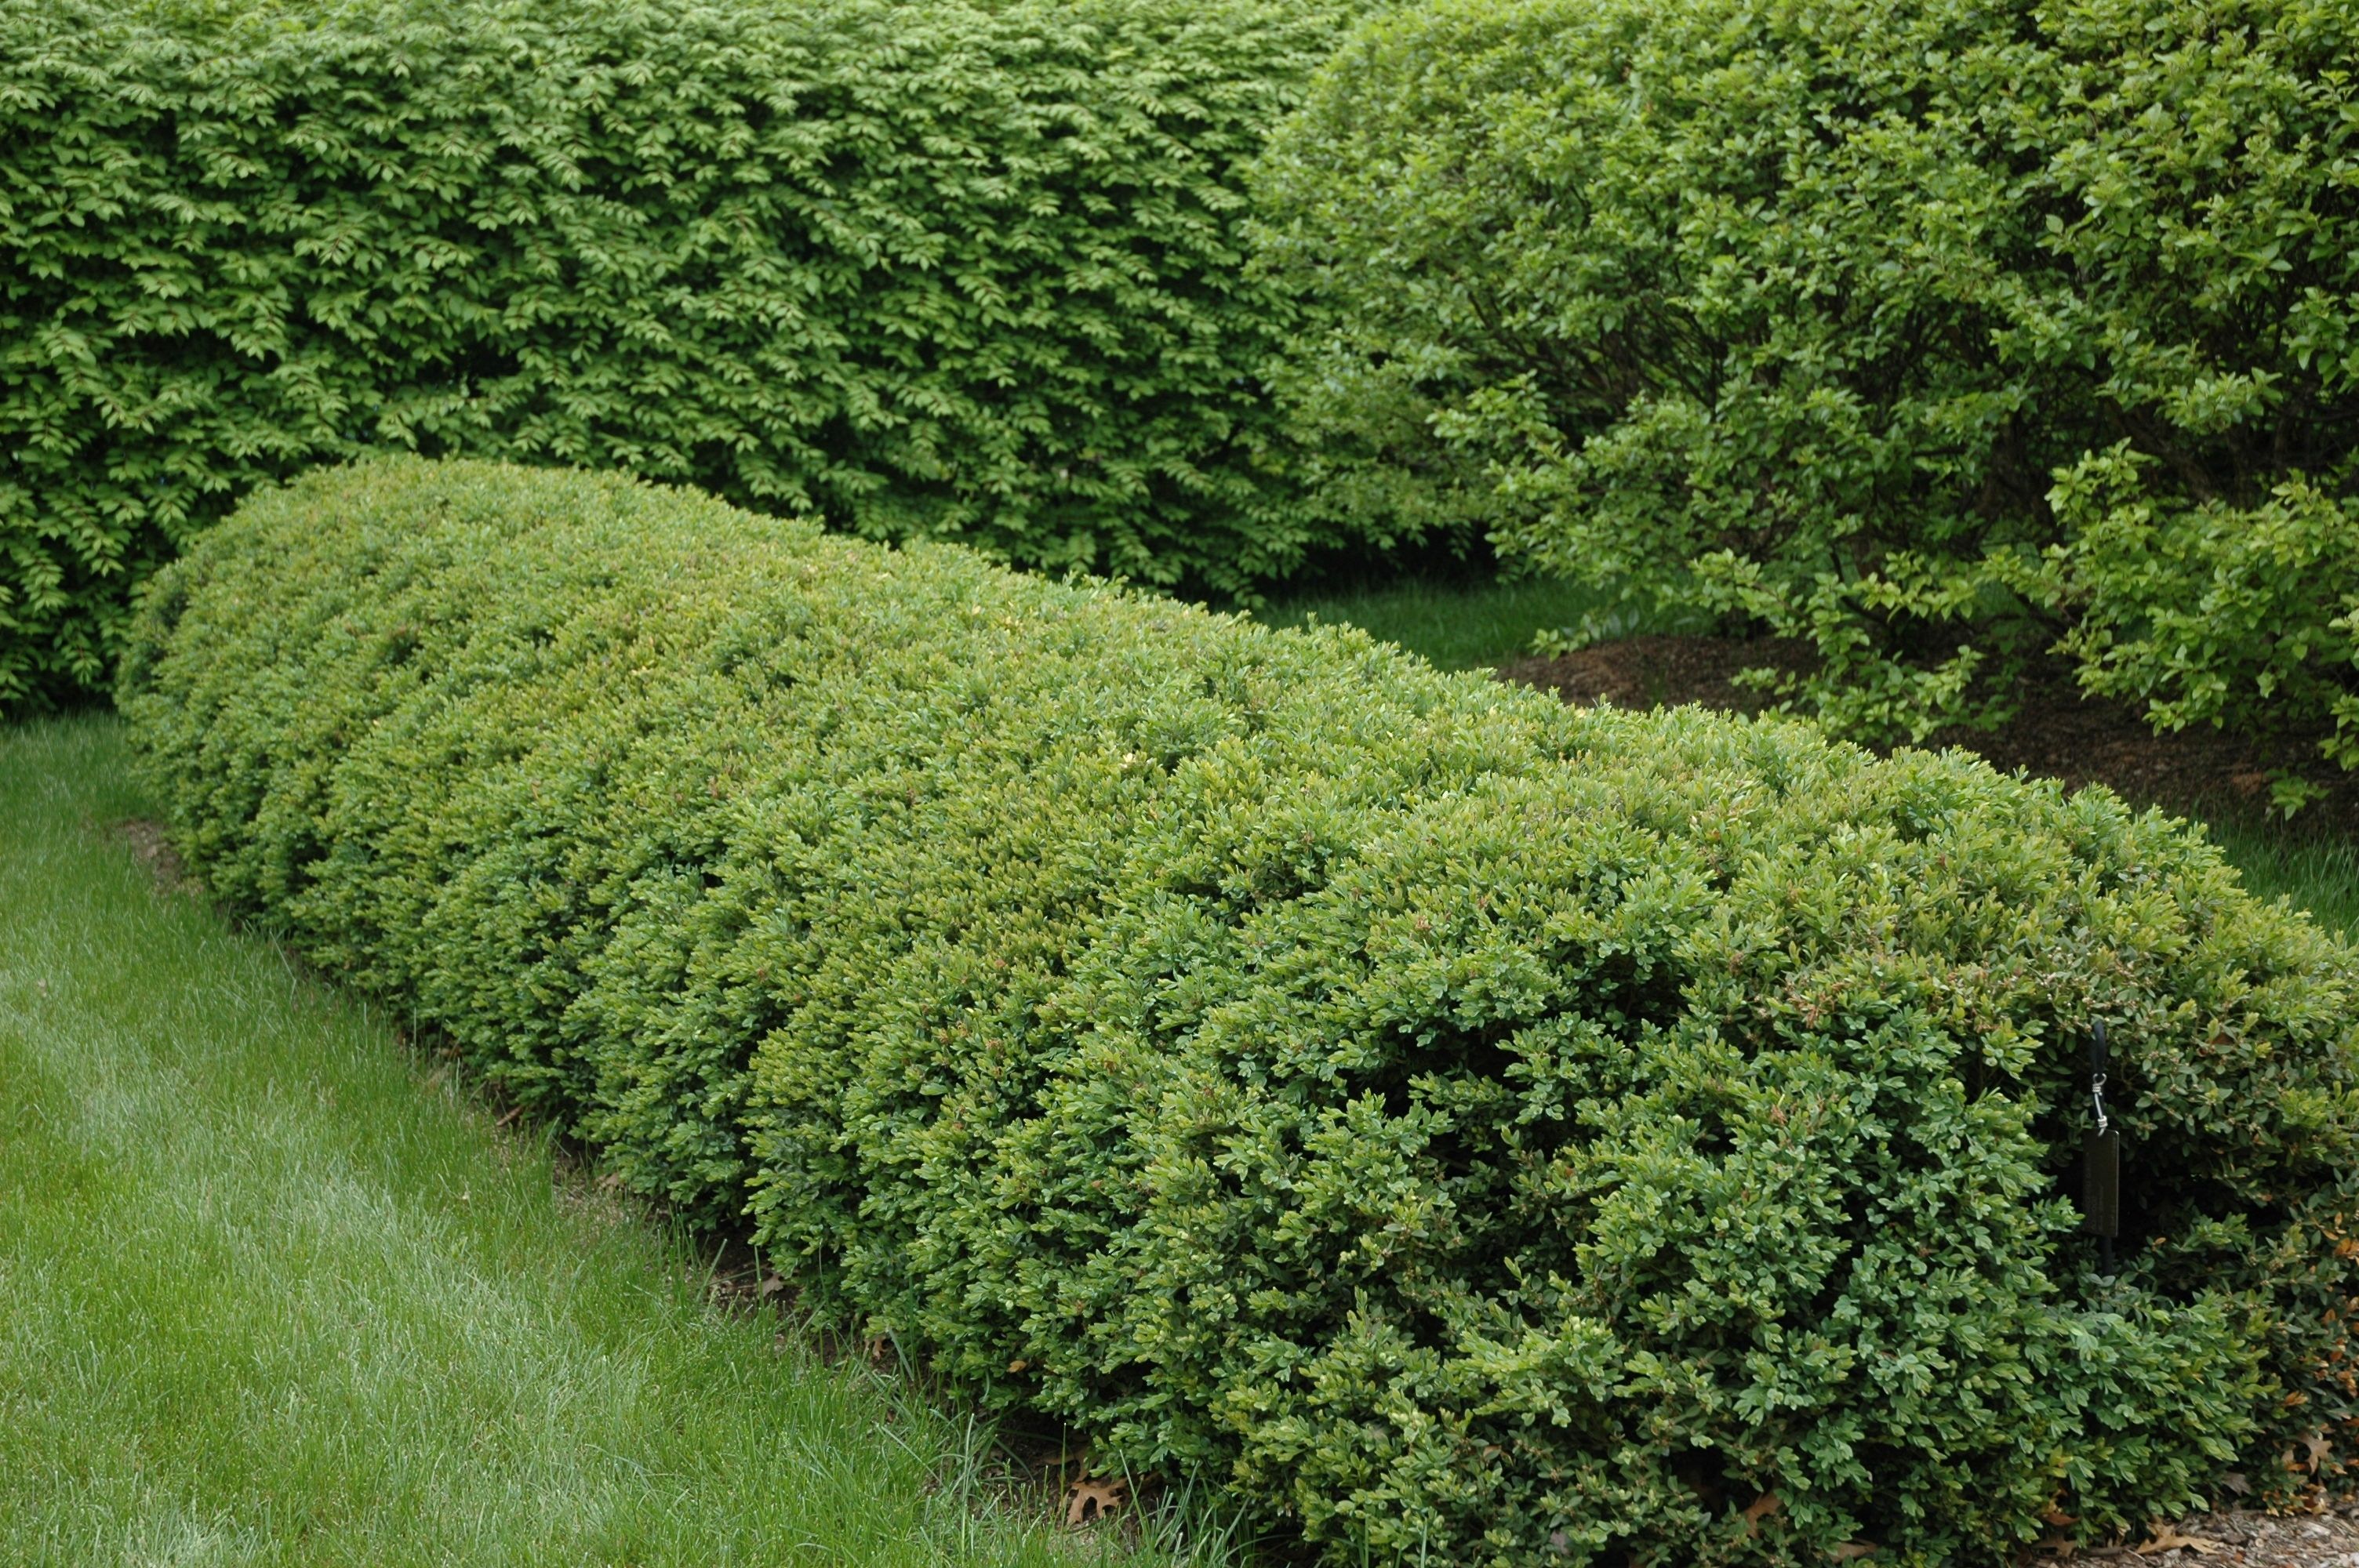 images/plants/buxus/bux-chicagoland-green/bux-chicagoland-green-0005.jpg